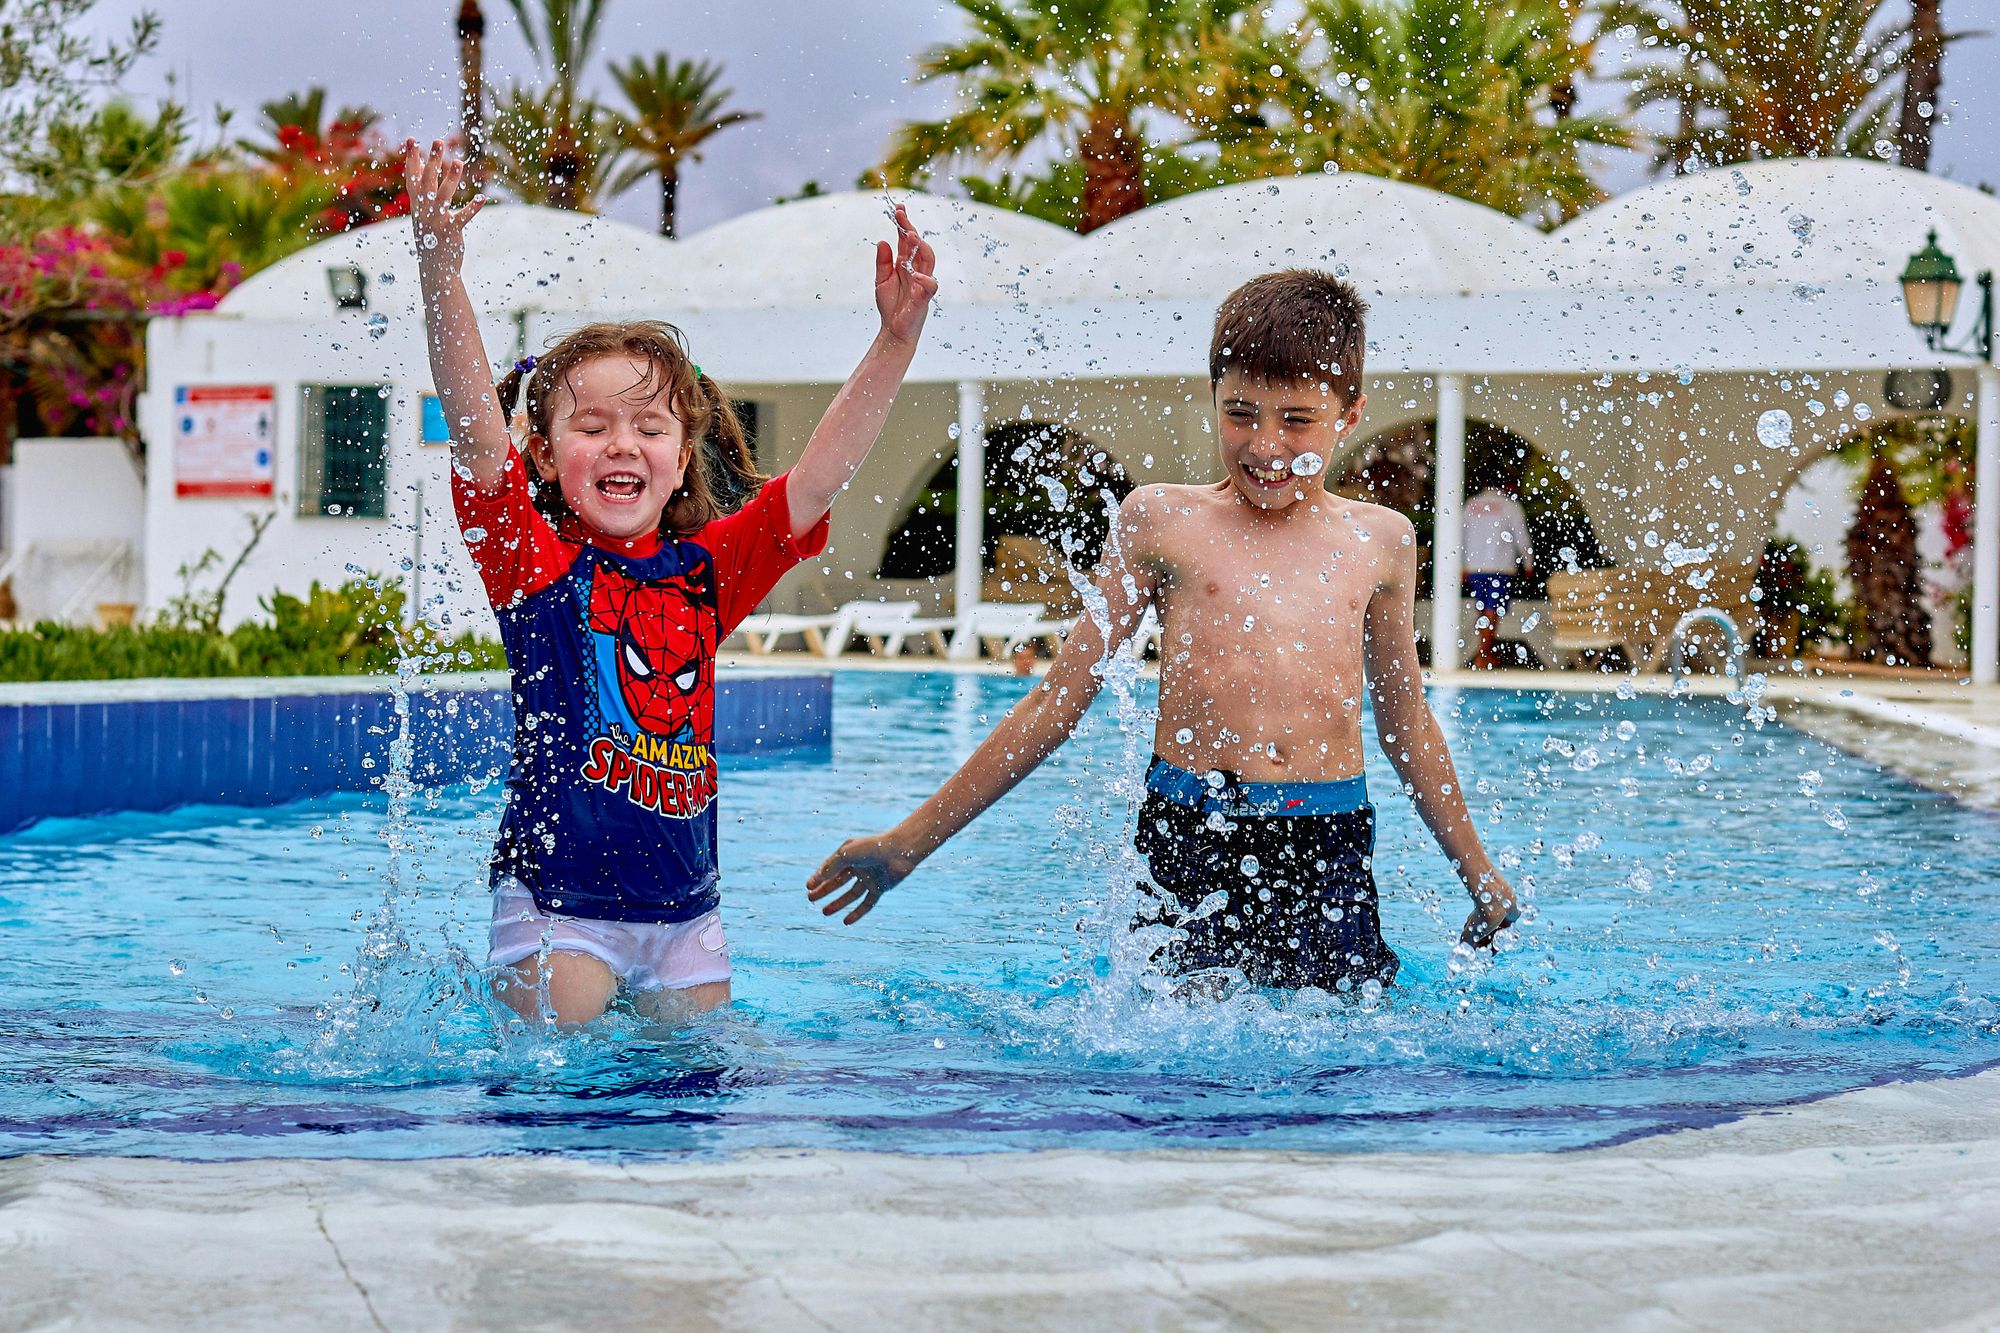 Two children splashing in the swimming pool together